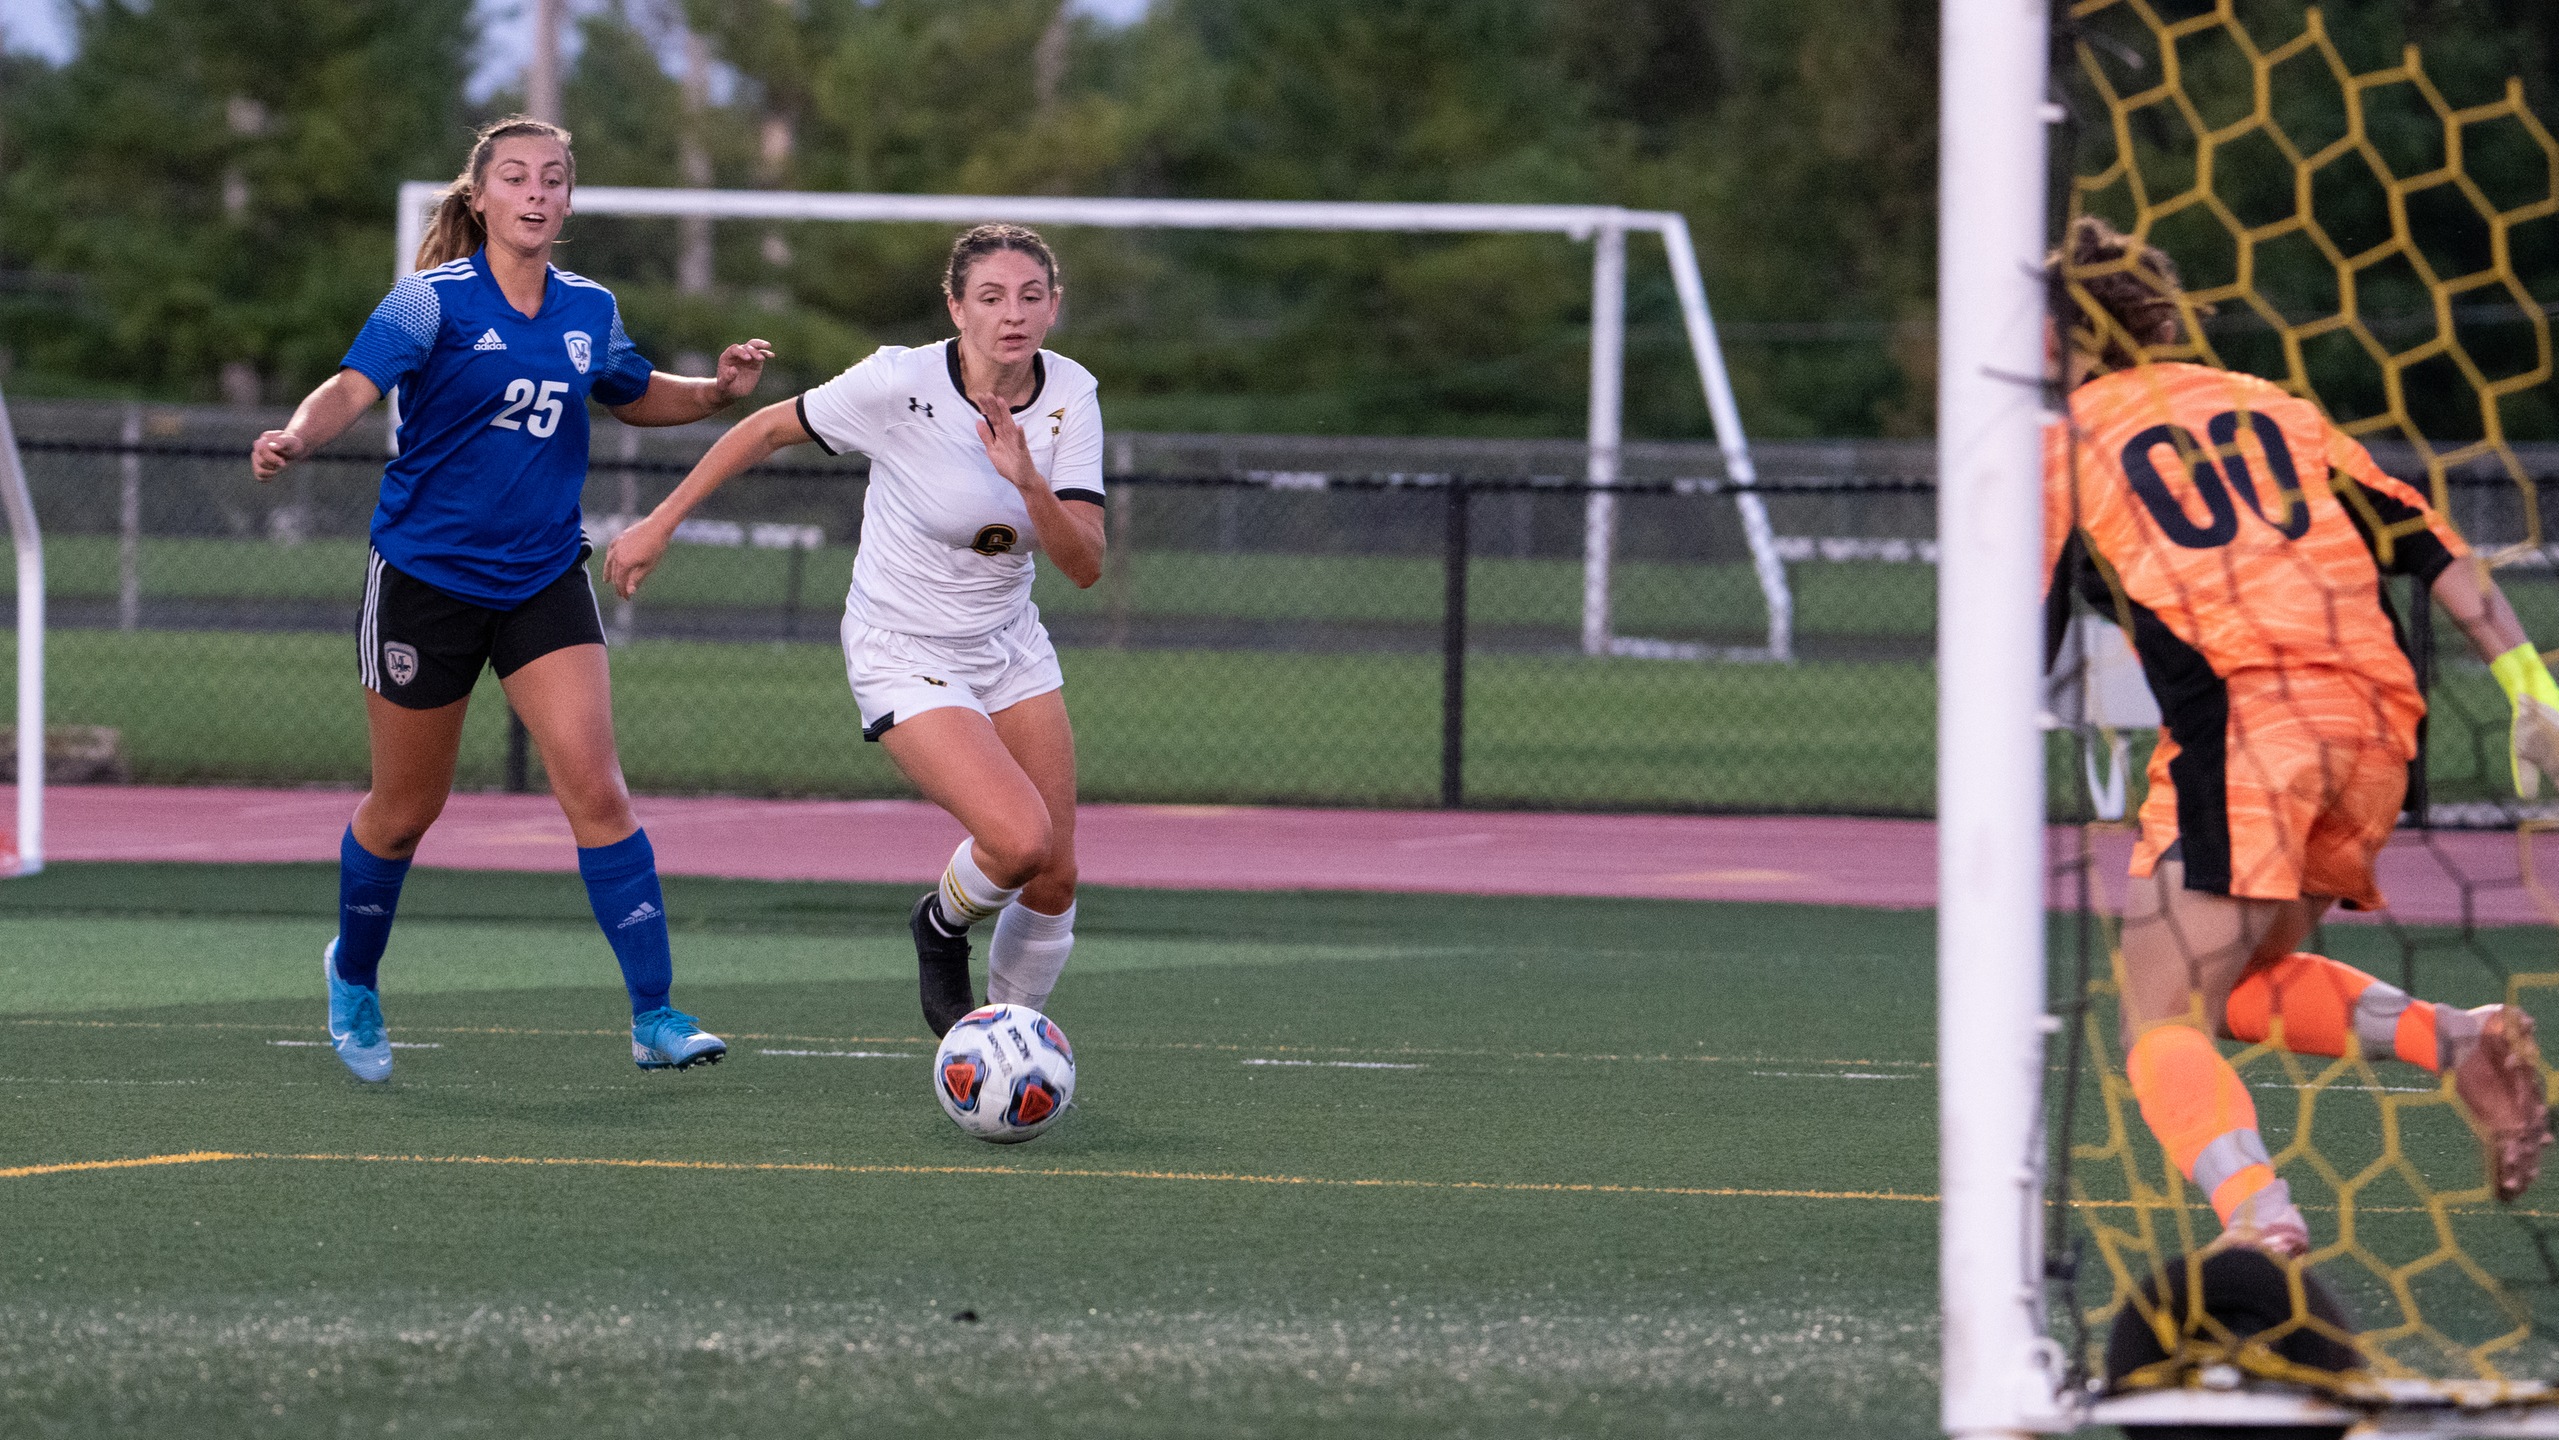 Mallory Knight, a two-time All-WIAC First Team selection, gave the Titans a 3-0 lead with her goal in the 60th minute.